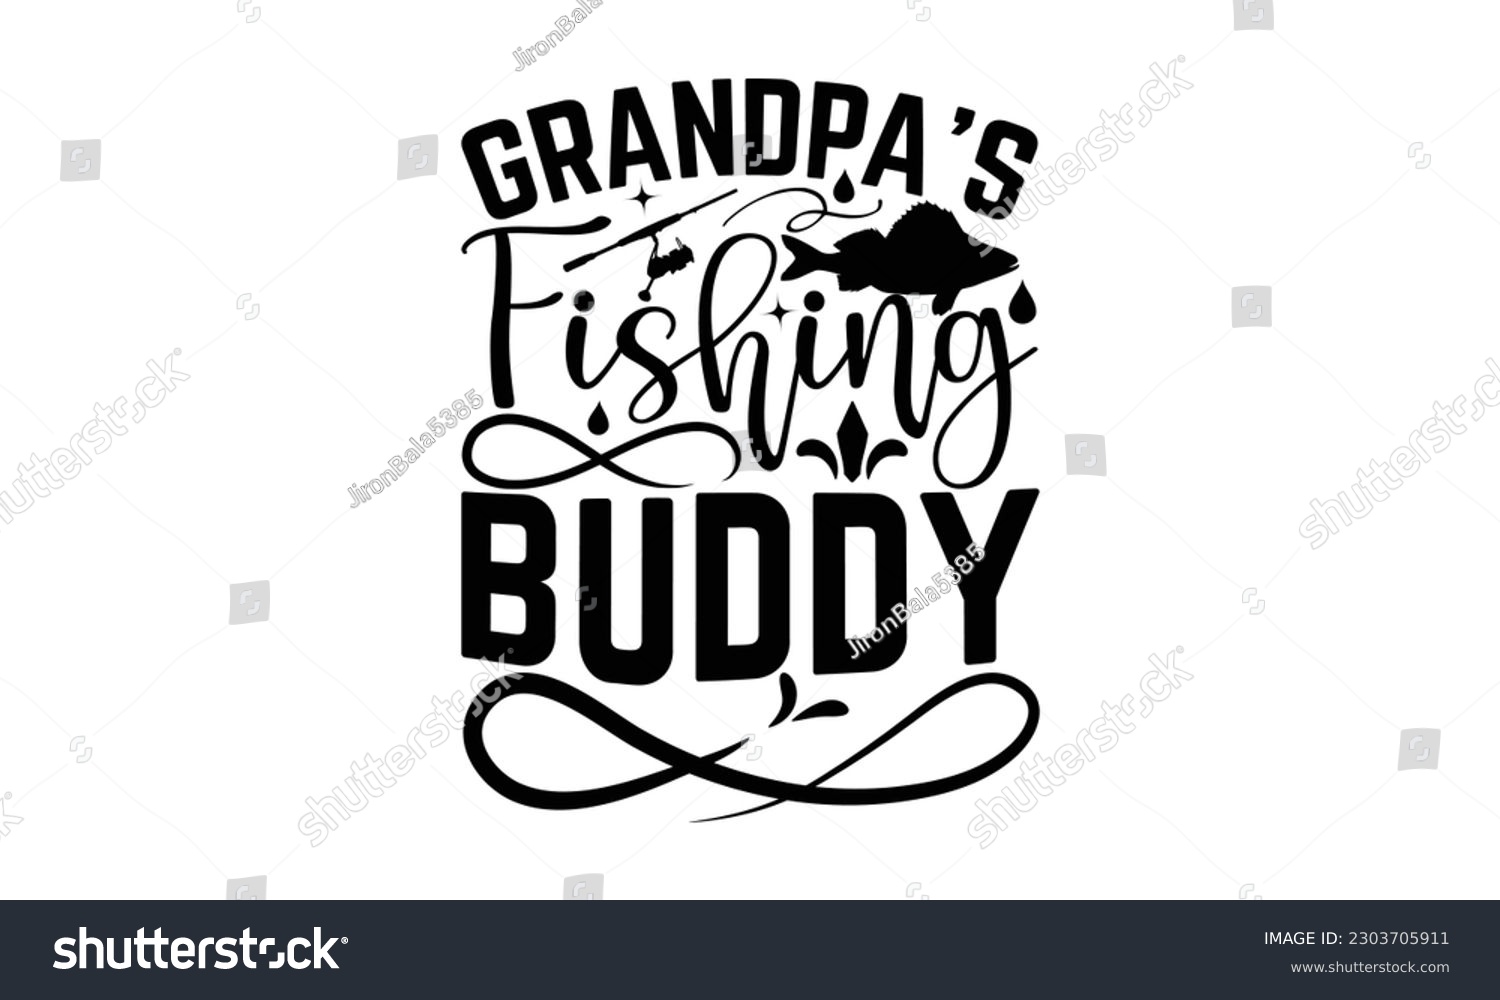 SVG of Grandpa’s Fishing Buddy - Fishing SVG Design, Hand written vector design, Illustration for prints on T-Shirts, bags and Posters, for Cutting Machine, Cameo, Cricut.
 svg